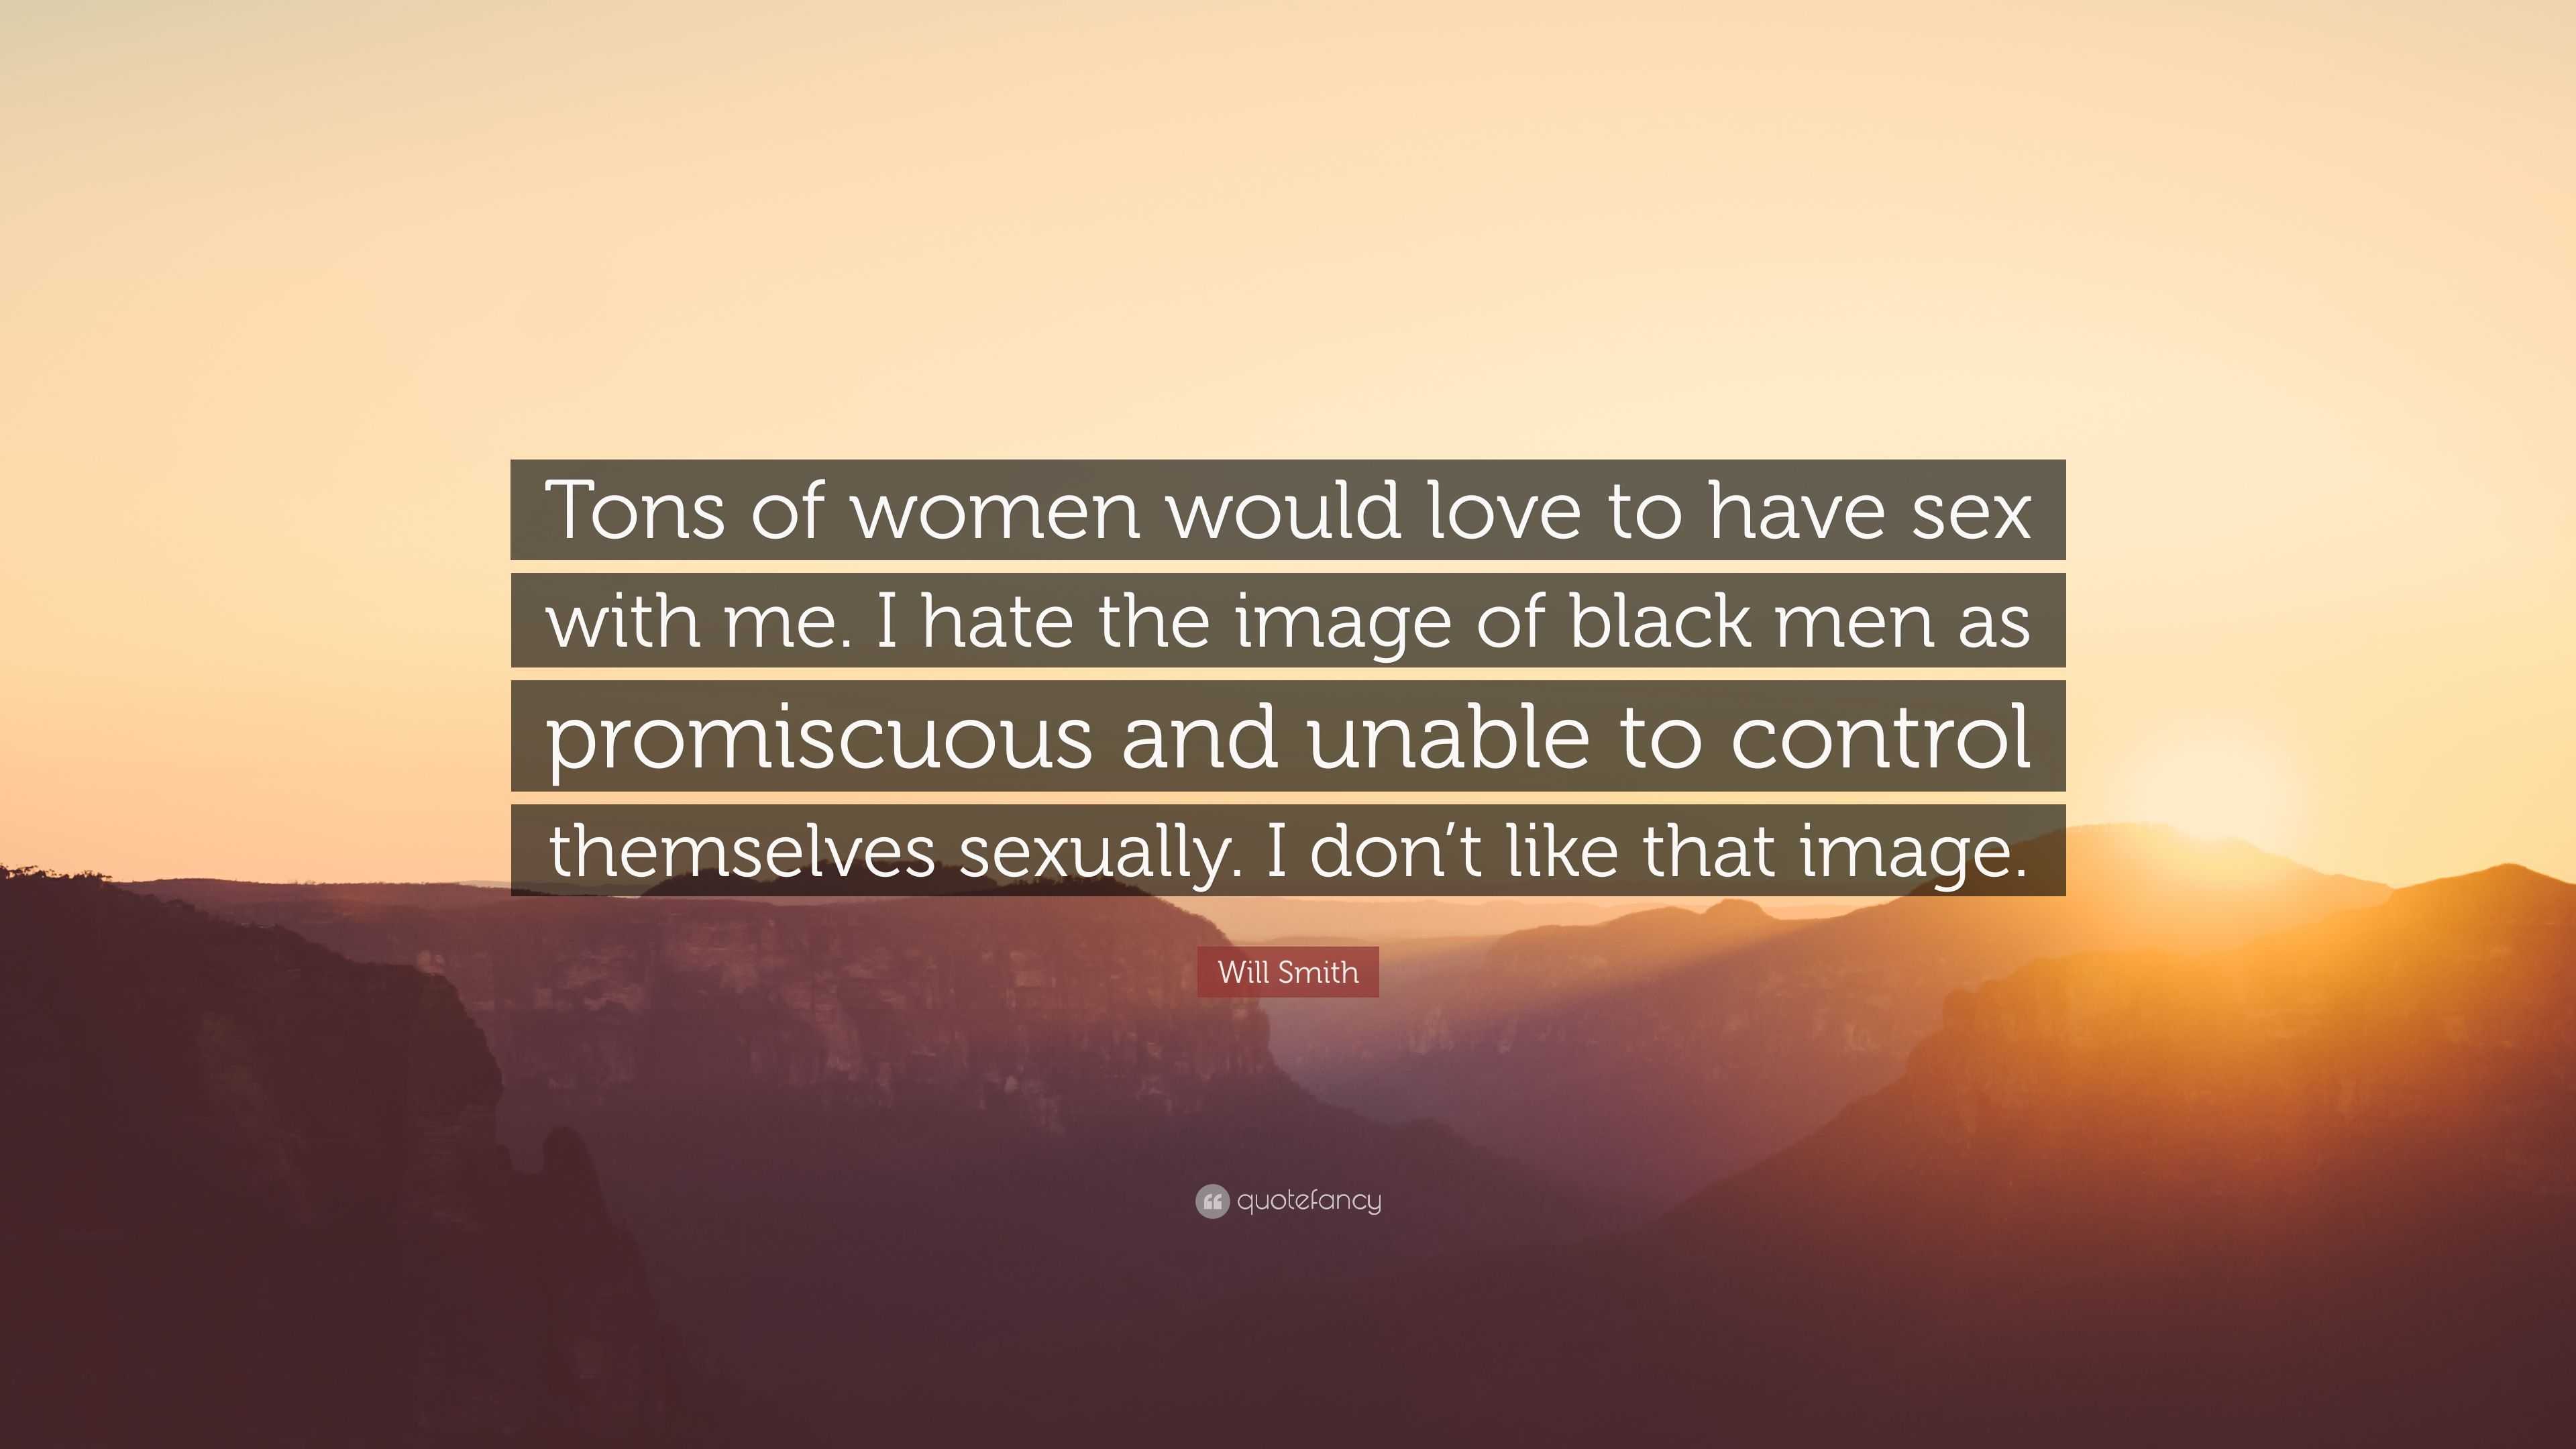 Will Smith Quote “Tons of women would love to have sex with me picture